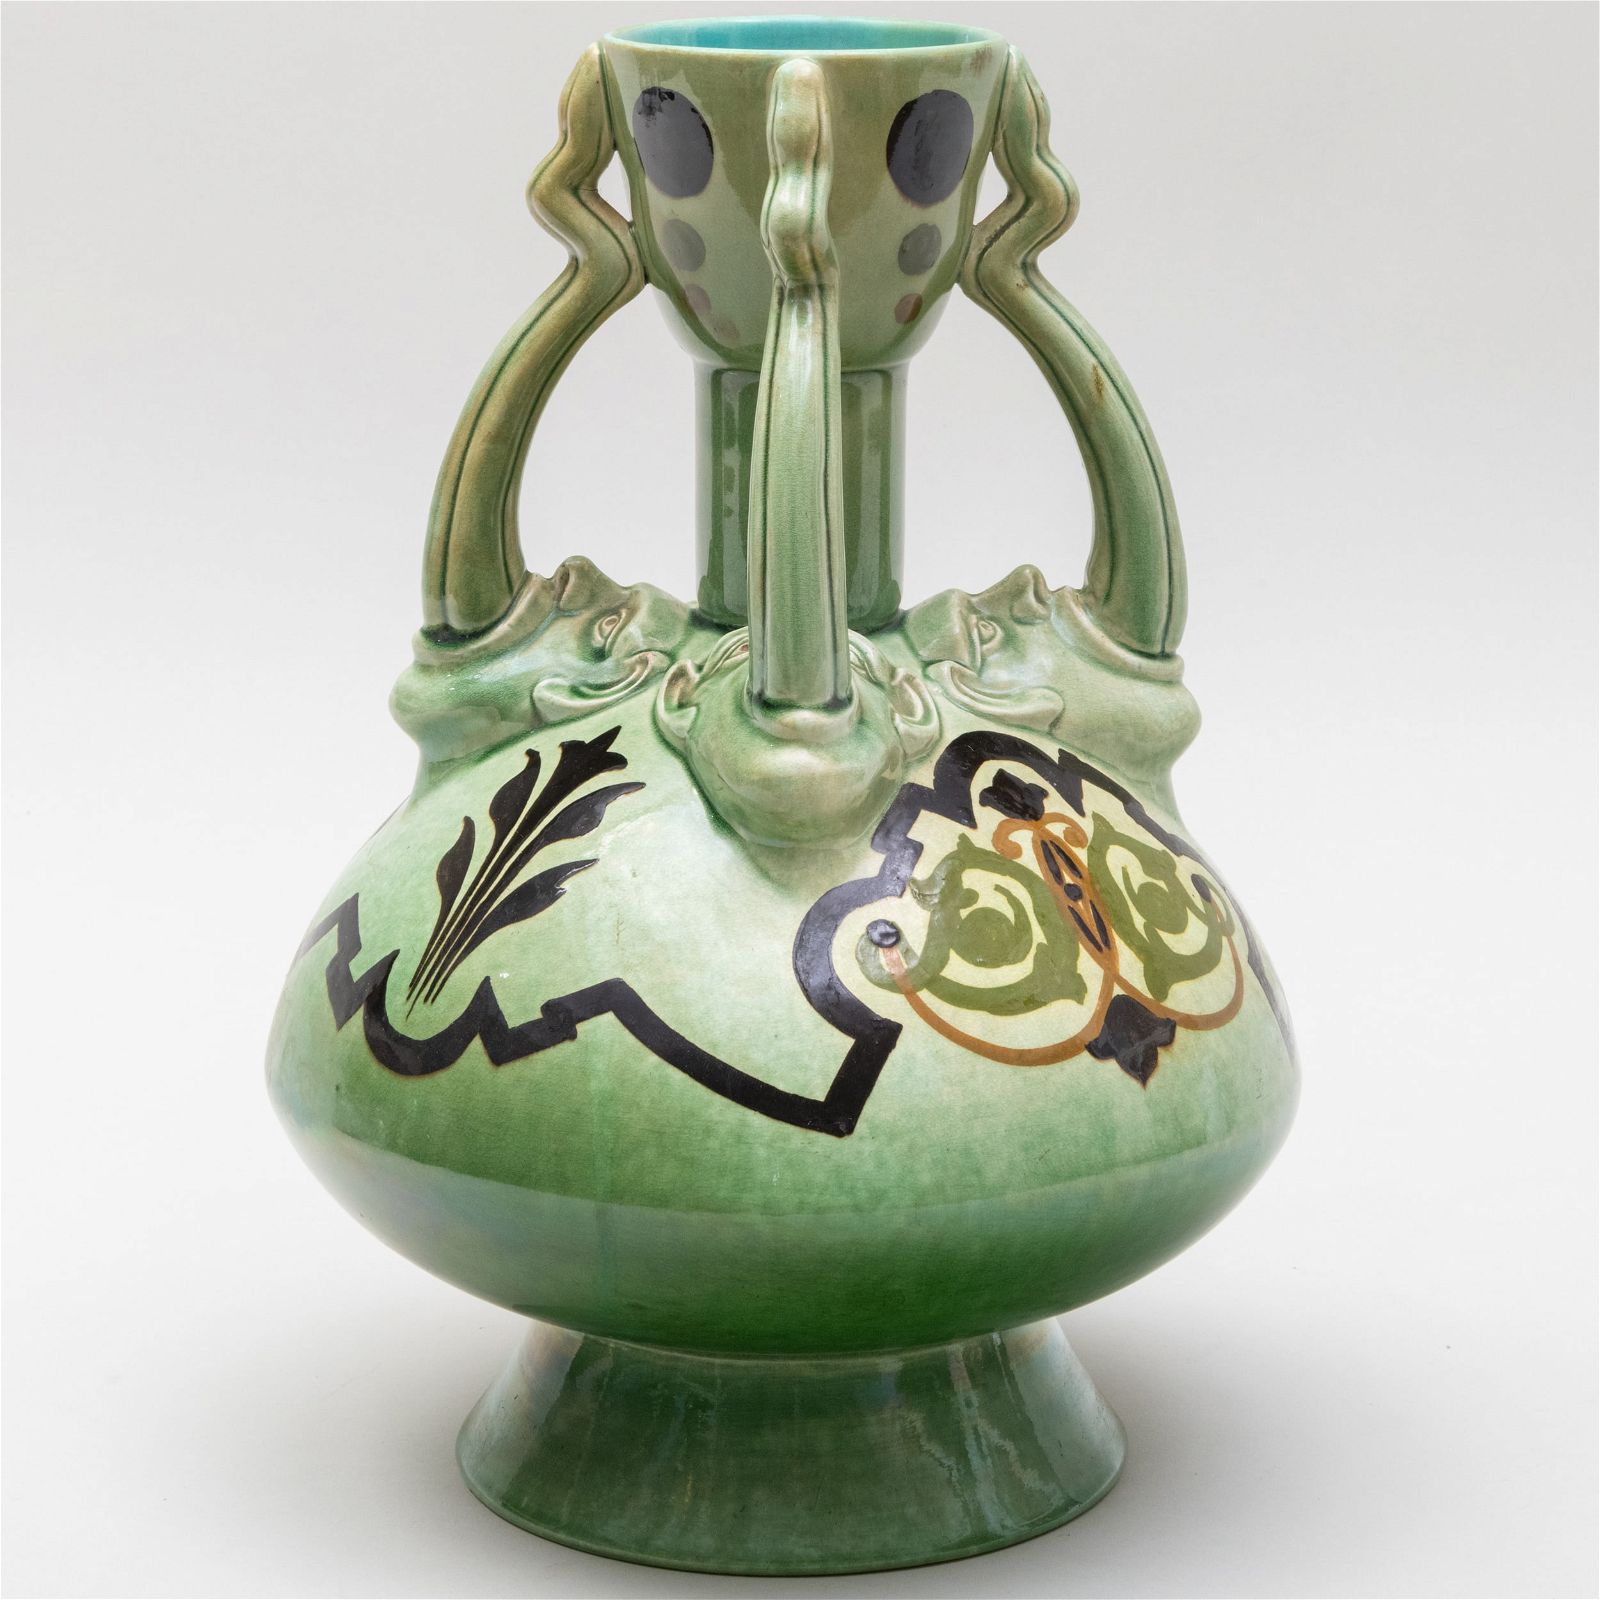 Grotesque vase designed by Christopher Dresser for William Ault Pottery, estimated at $1,000-$1,500 at Stair Galleries.